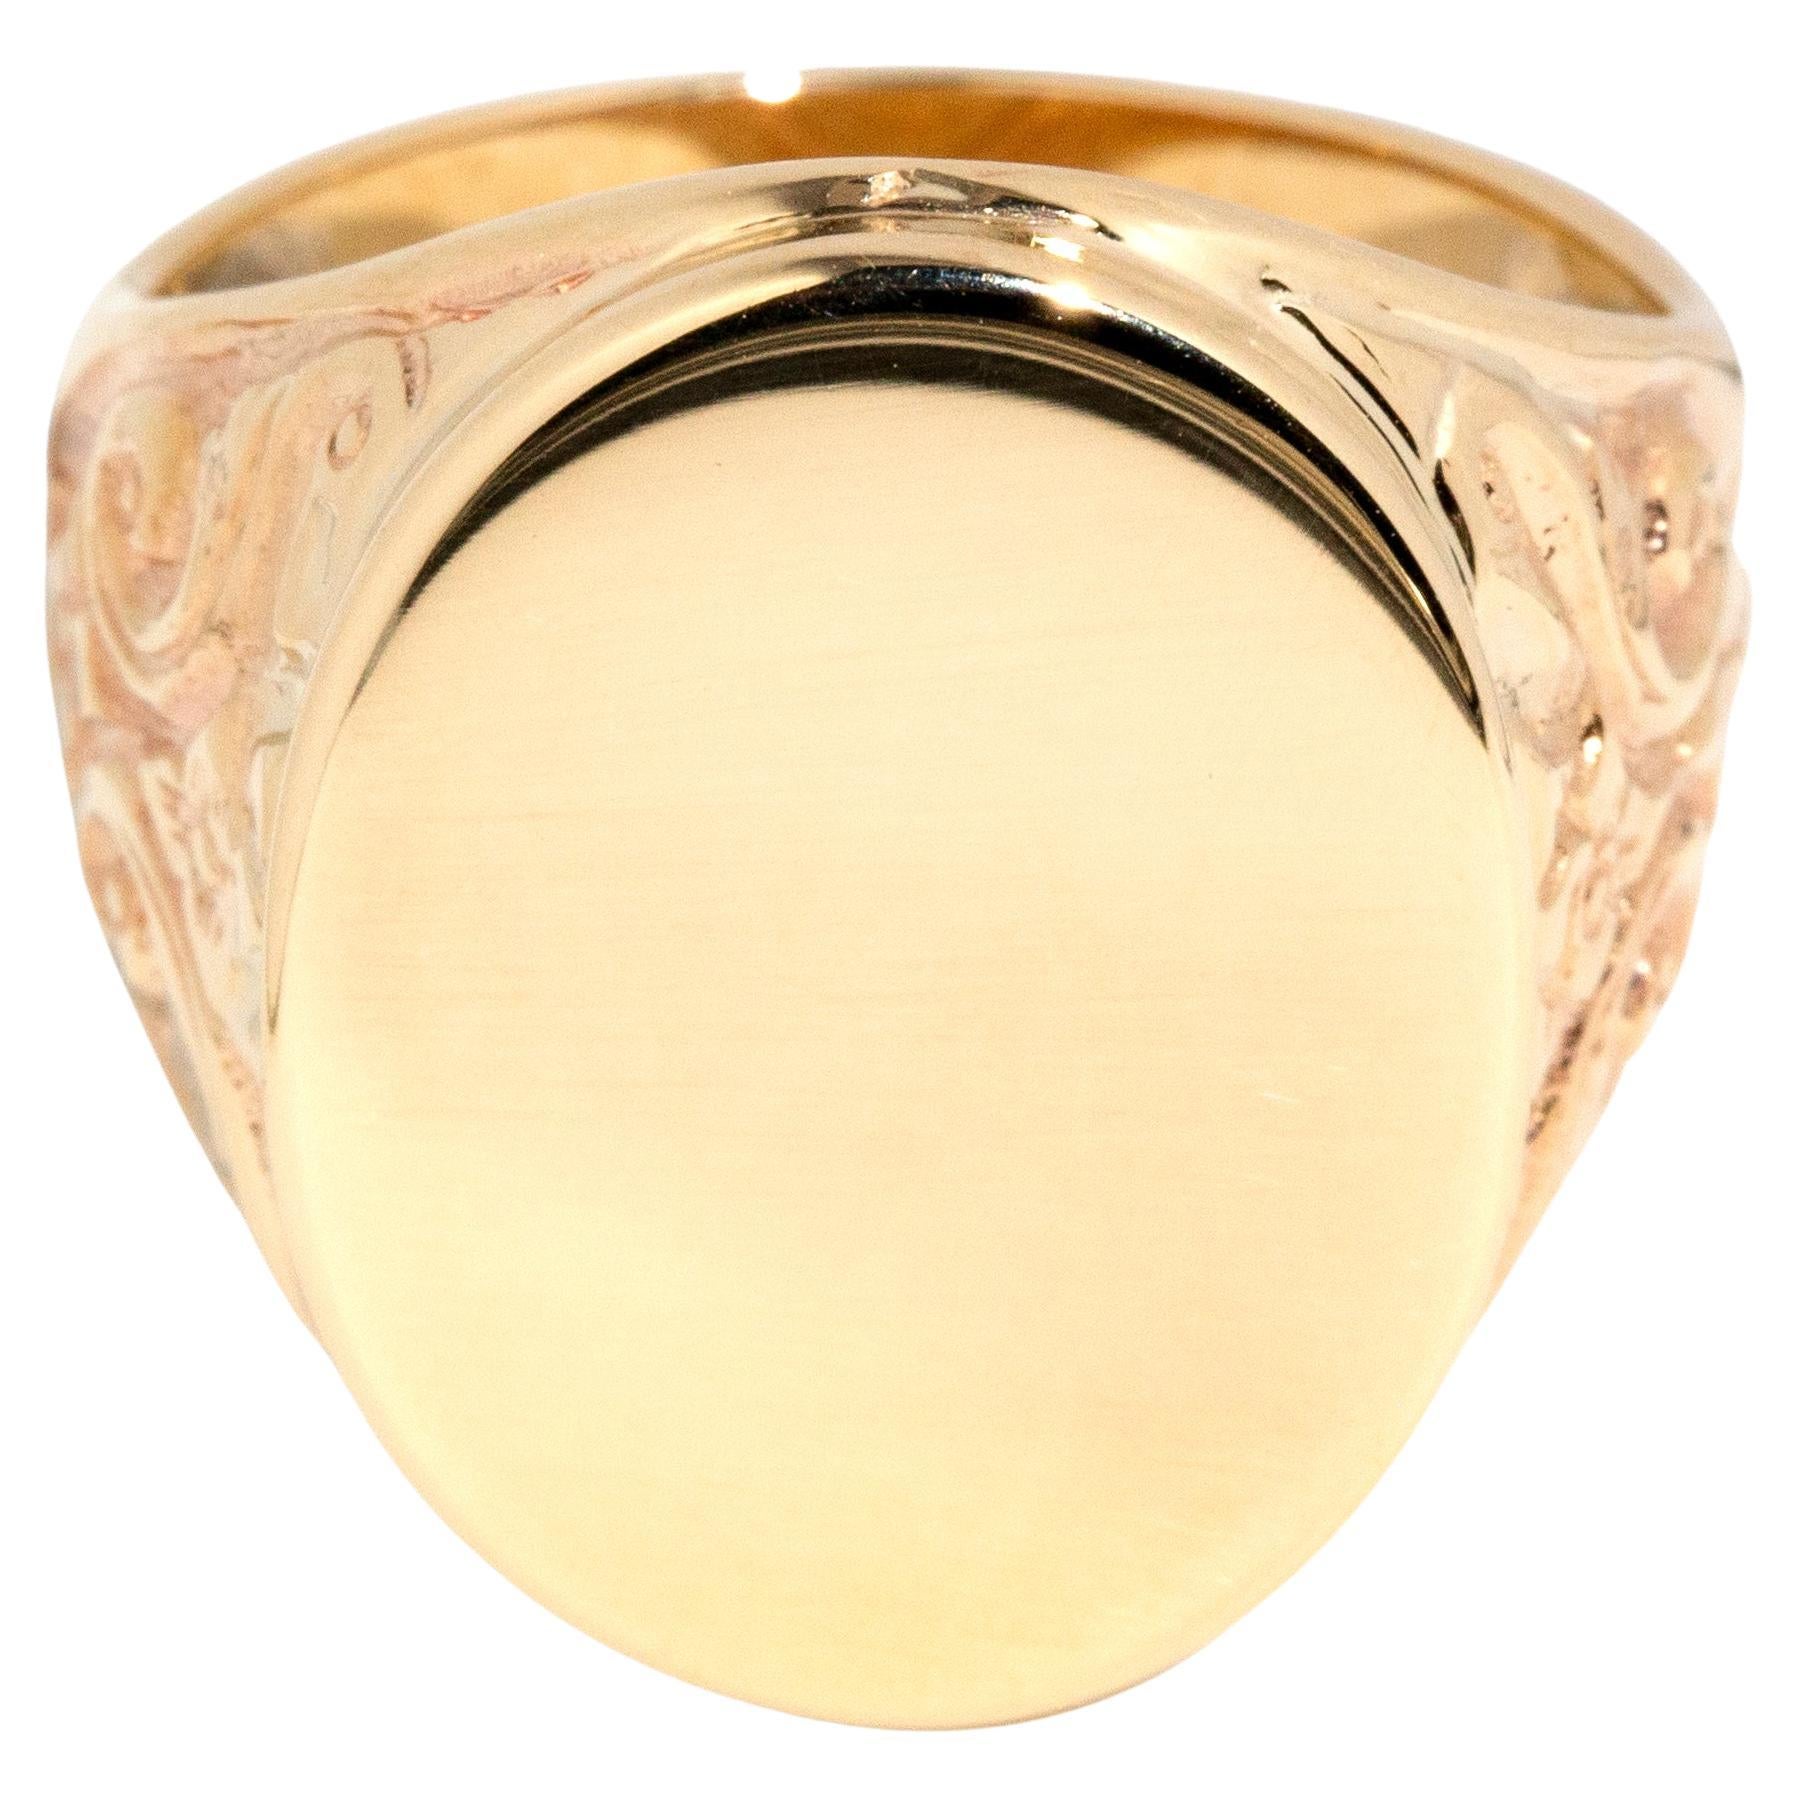 Vintage circa 1970s 9 Carat Yellow Gold Domed Oval Patterned Unisex Signet Ring For Sale